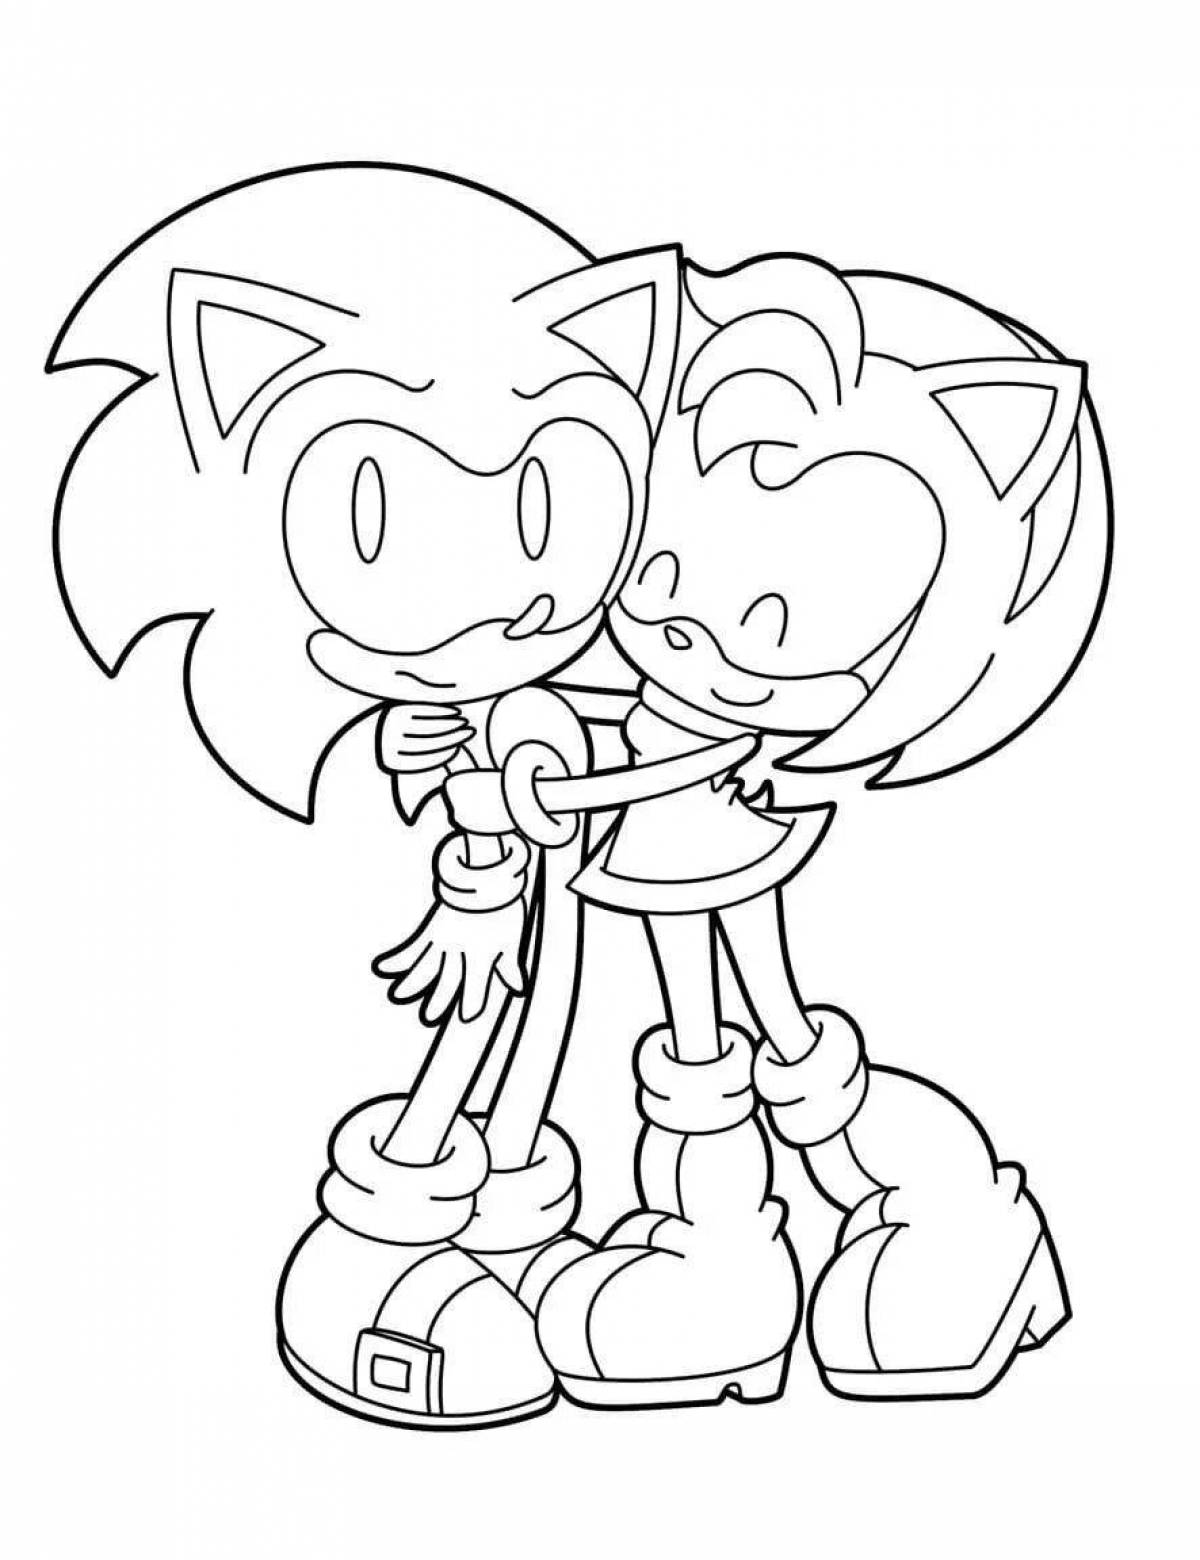 Animated baby sonic coloring page